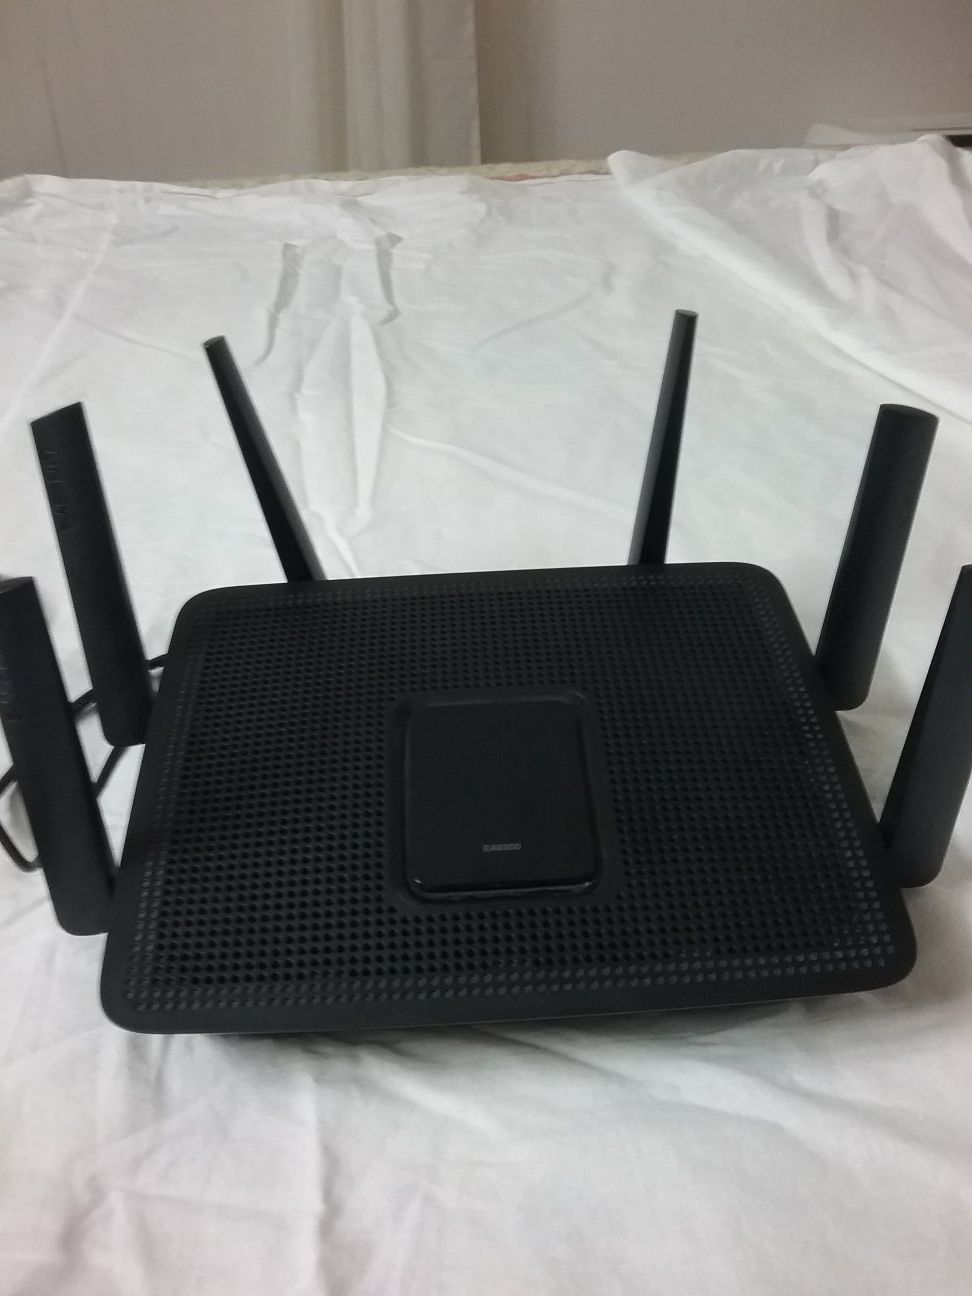 Linksys router EA9300